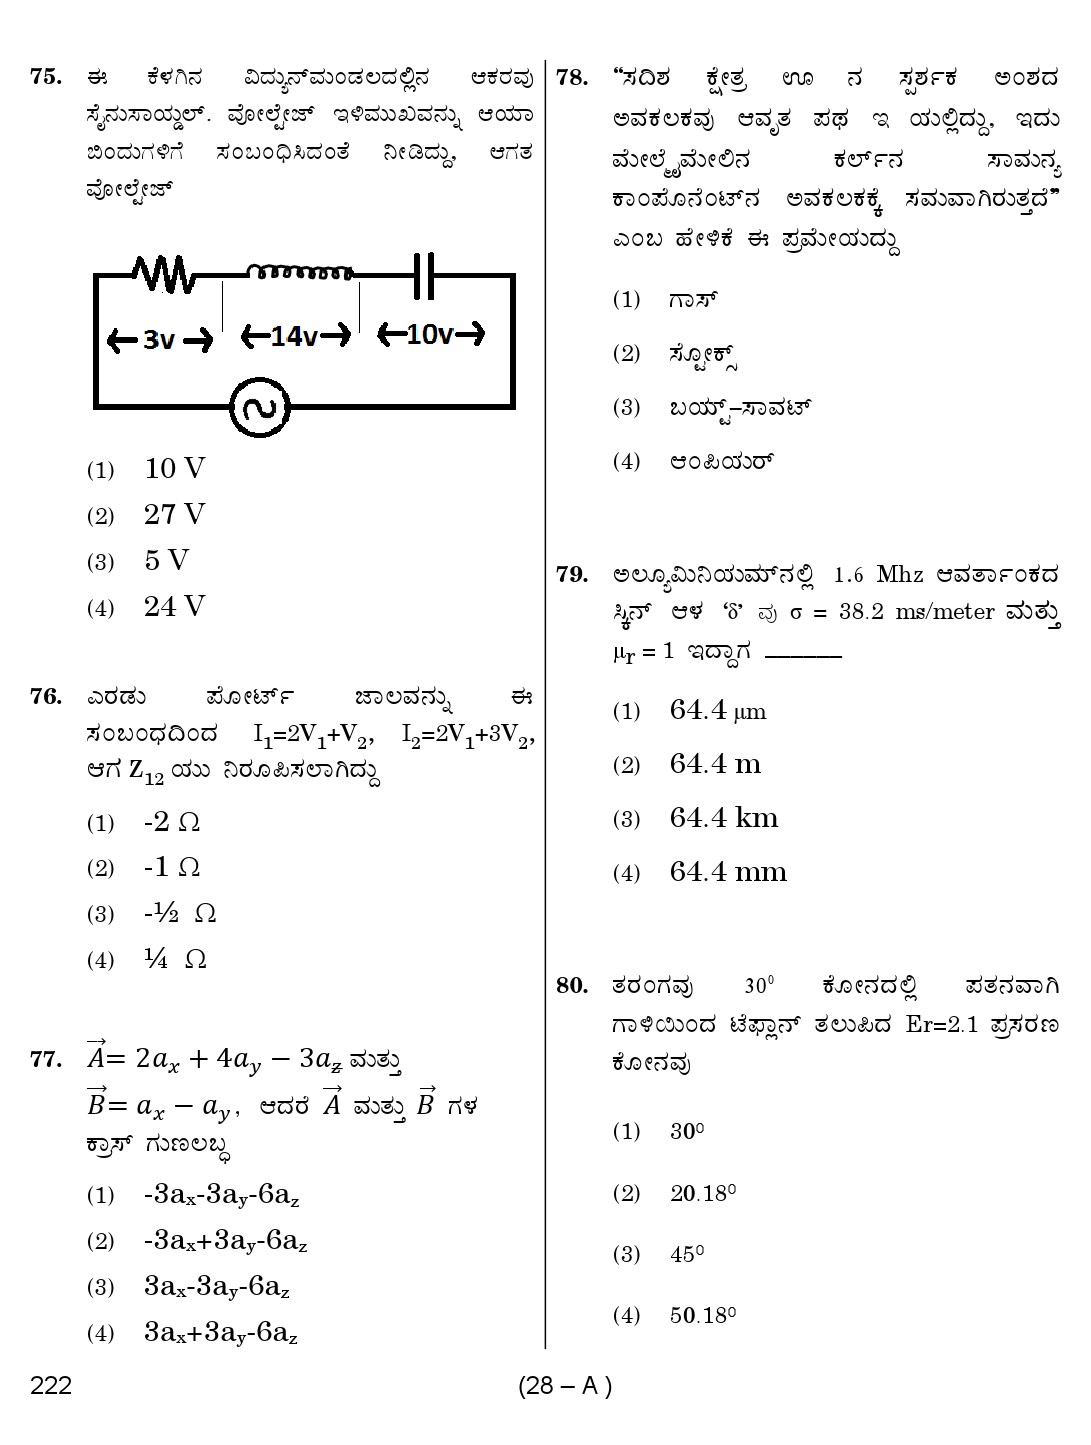 Karnataka PSC Assistant Engineer Electrical Exam Sample Question Paper 28